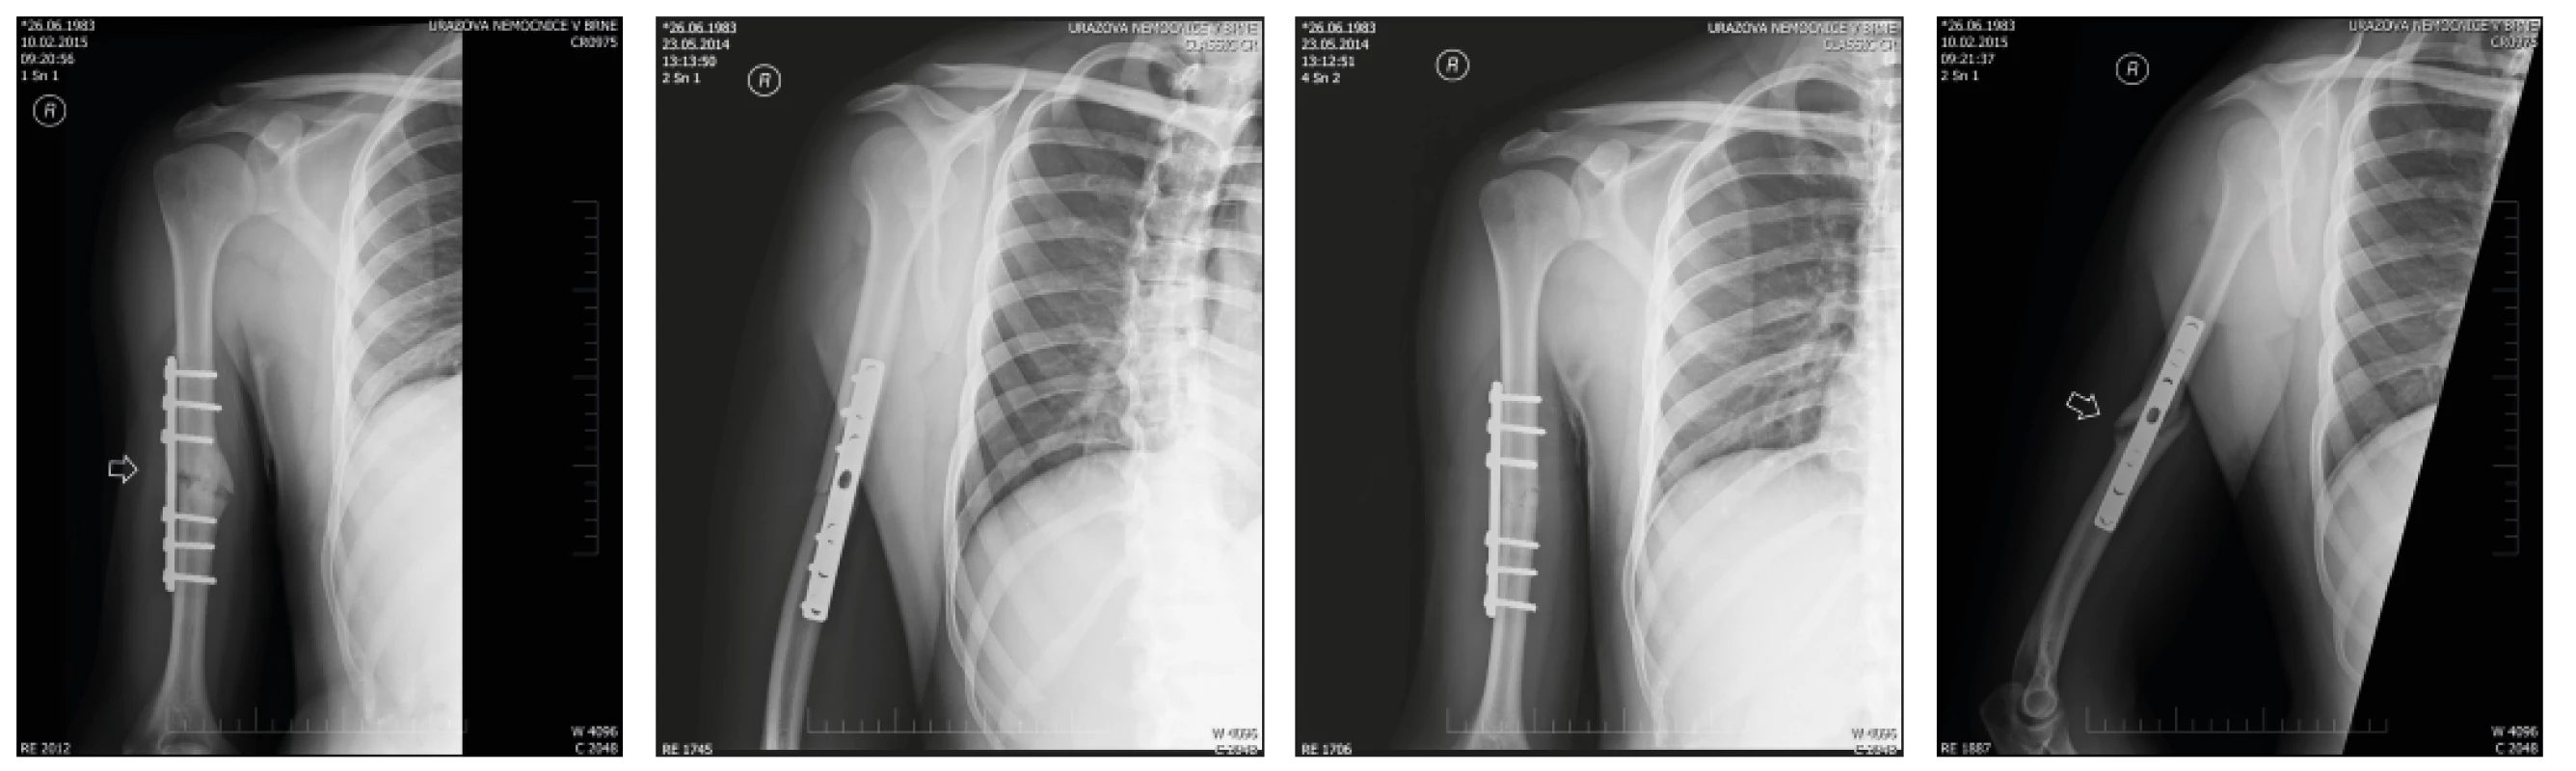 Radiograph of the humerus in anteroposterior and lateral projections. Postoperative radiograph (2a) and radiograph taken 9 months after injury (2b) depict a nail osteosynthesis of diaphyseal humeral fracture type A2. Stabilization  with auto-compression plate with insufficient compression at the fracture line resulted in a gradual progression into the non-union